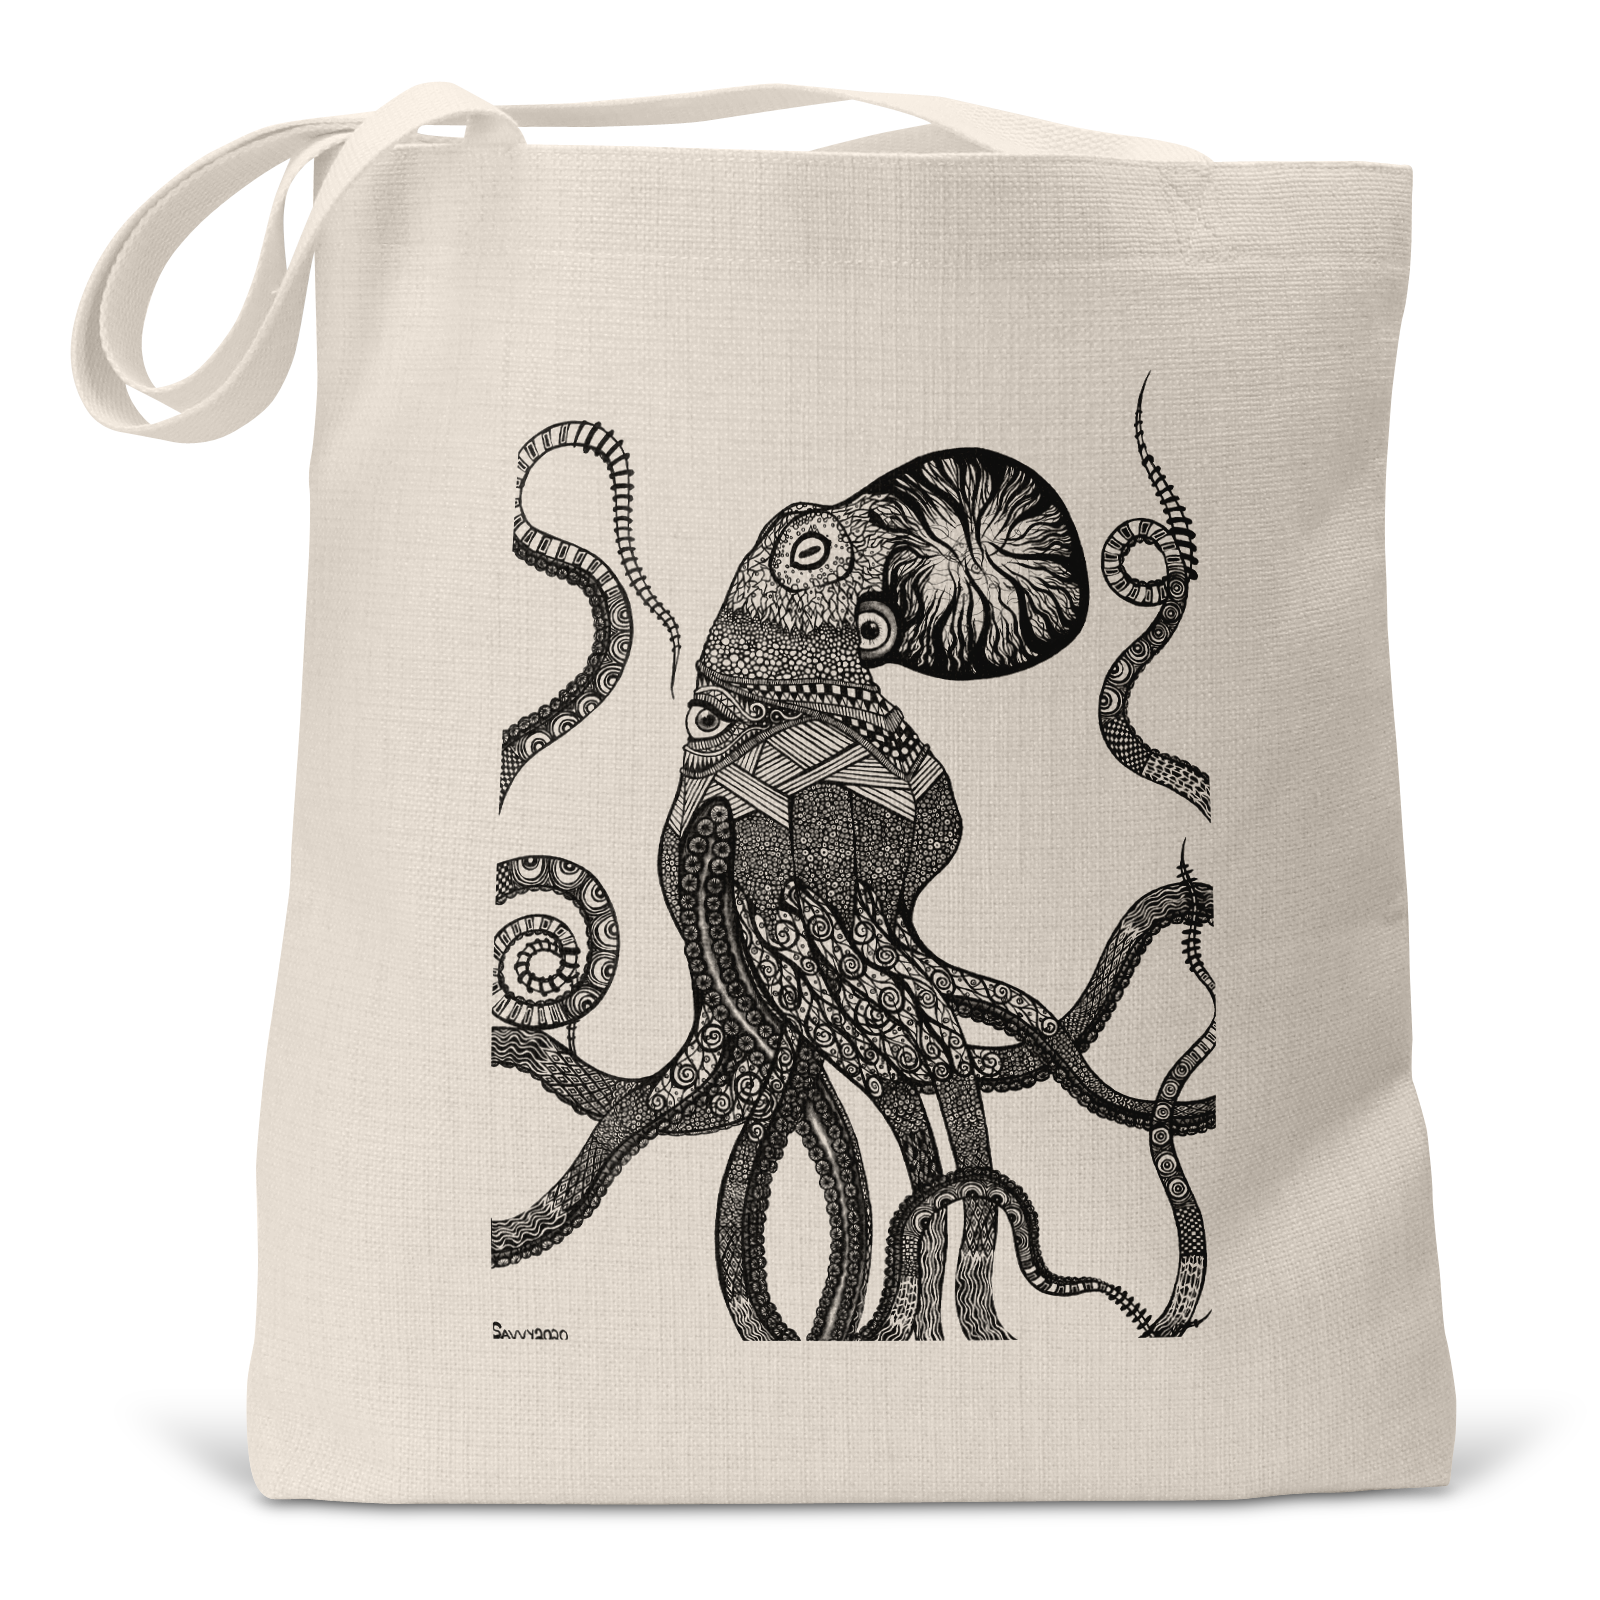 "Ocular Octopus" (Black/White Version) - Small/Large Linen Tote